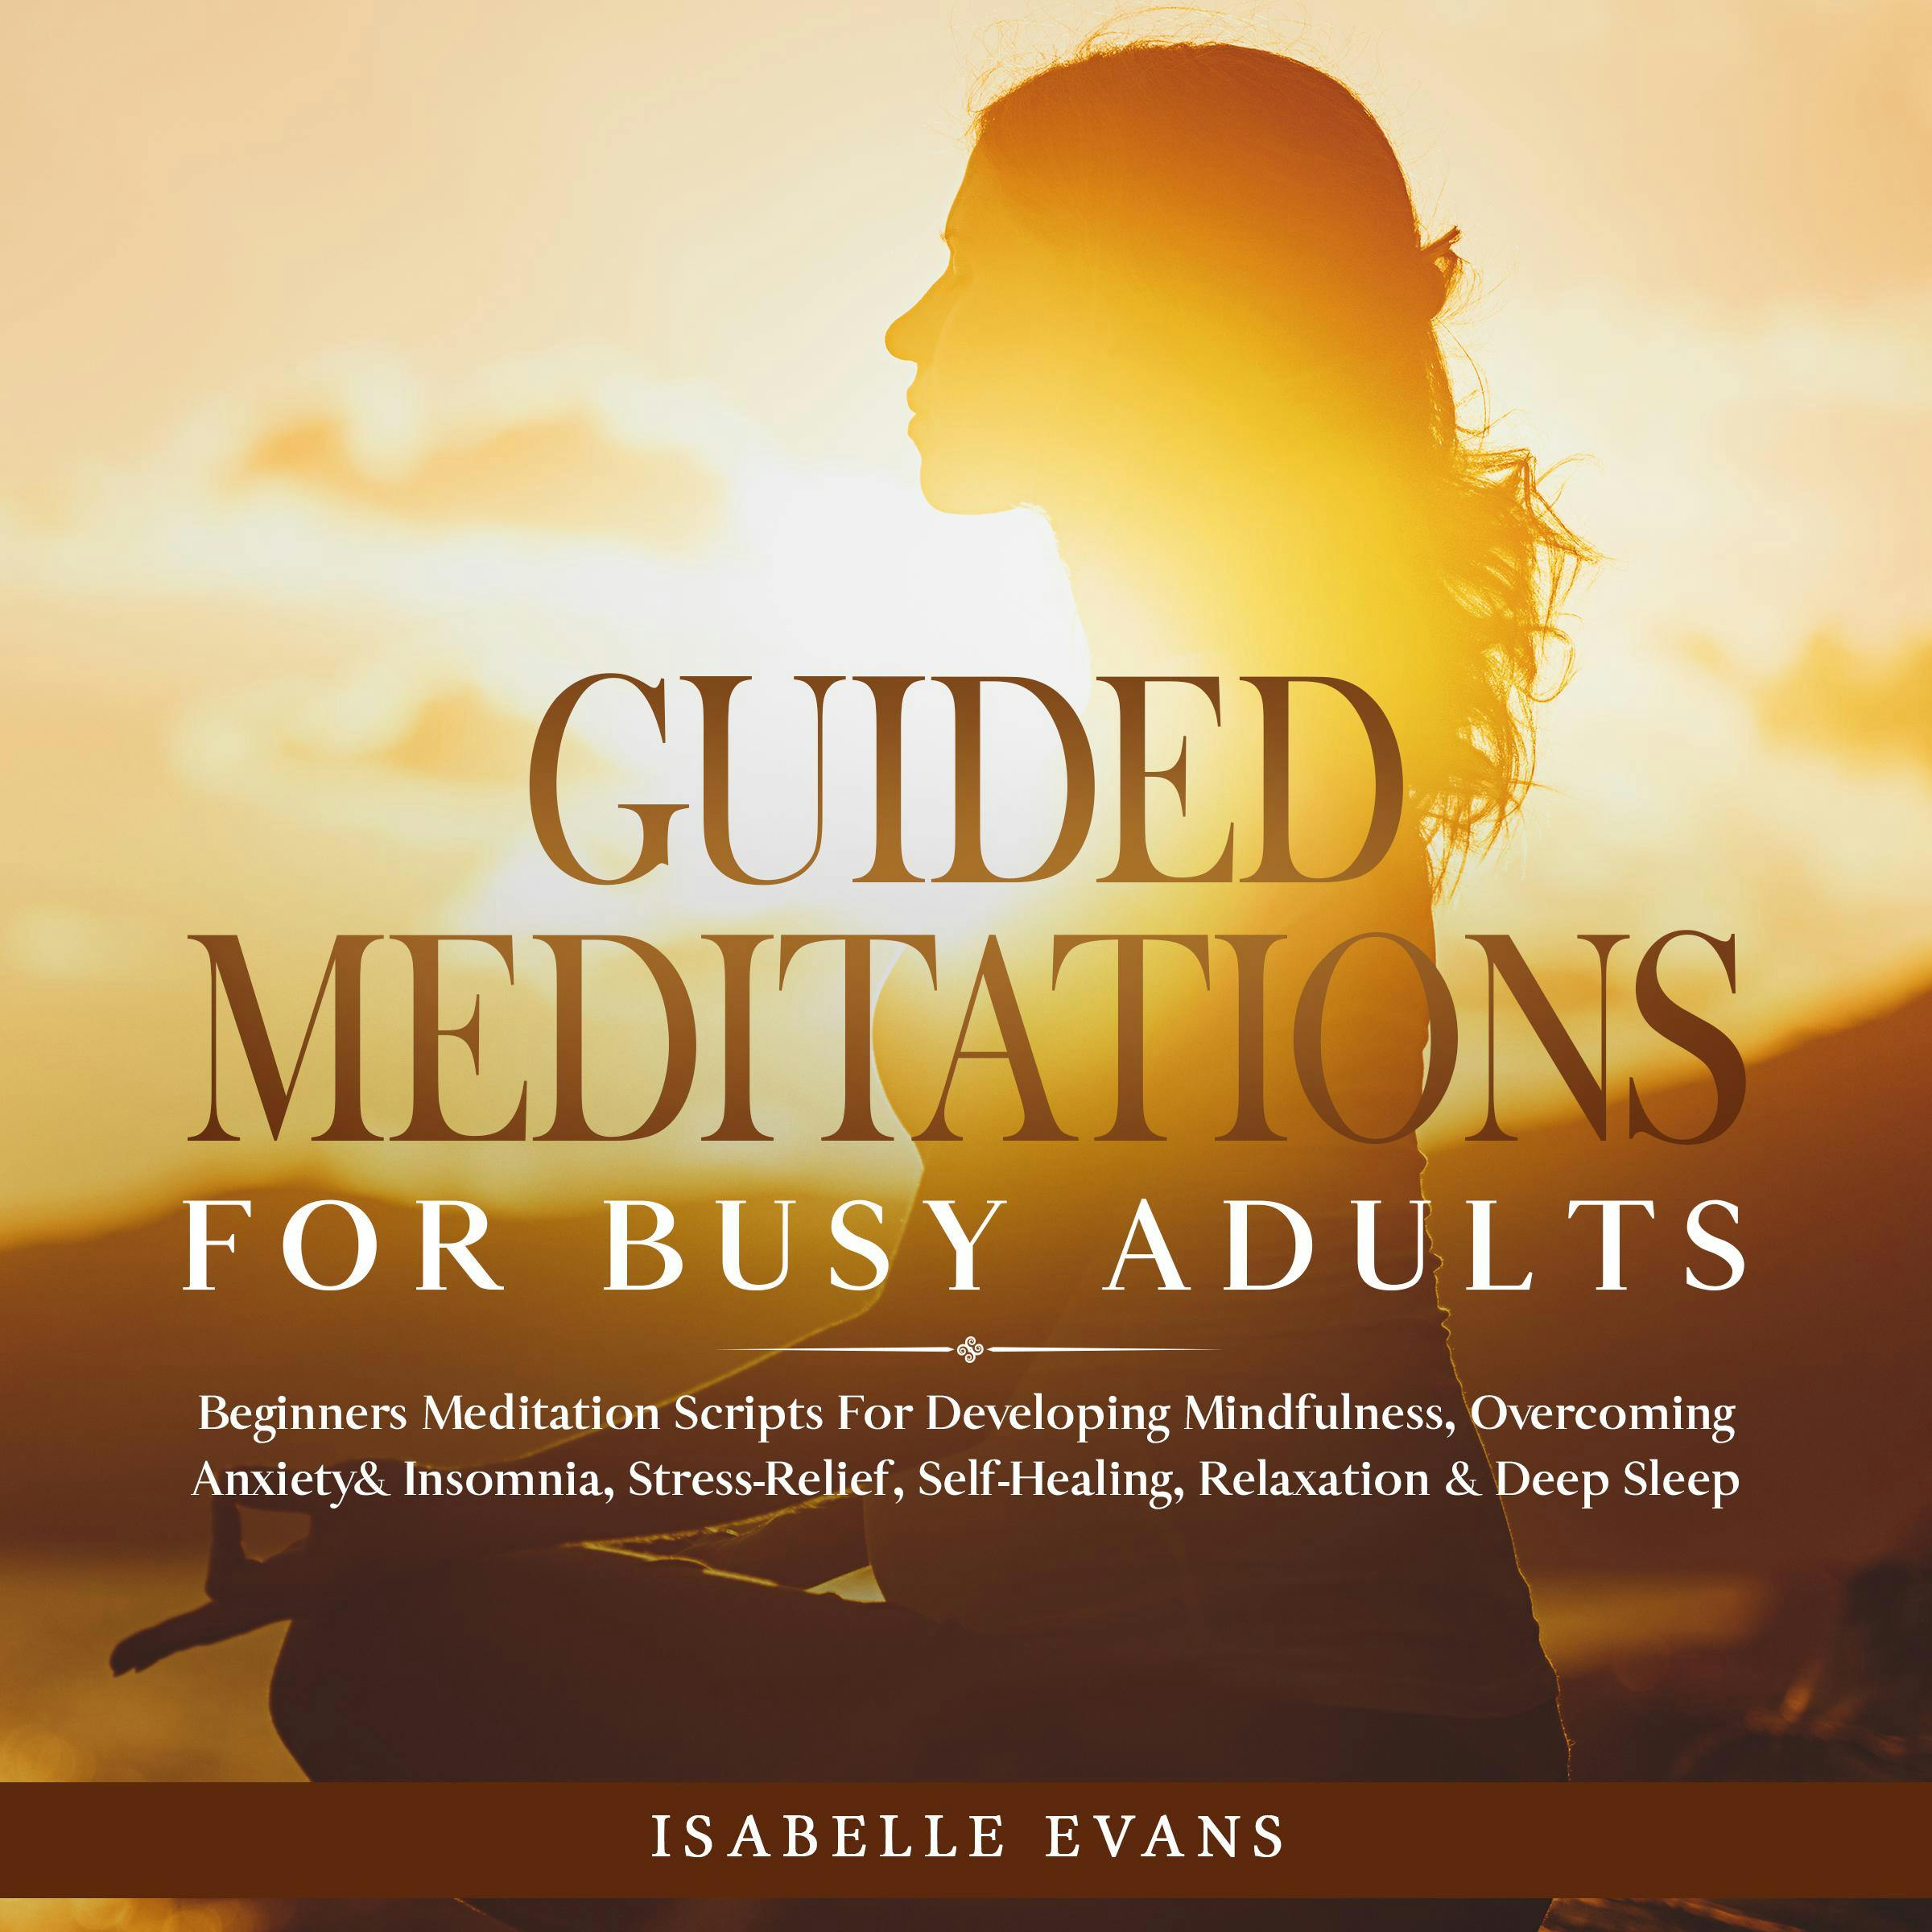 Guided Meditations For Busy Adults: Beginners Scripts For Developing Mindfulness, Overcoming Anxiety & Insomnia, Stress-Relief, Self-Healing, Relaxation & Deep Sleep & Overthinking - undefined